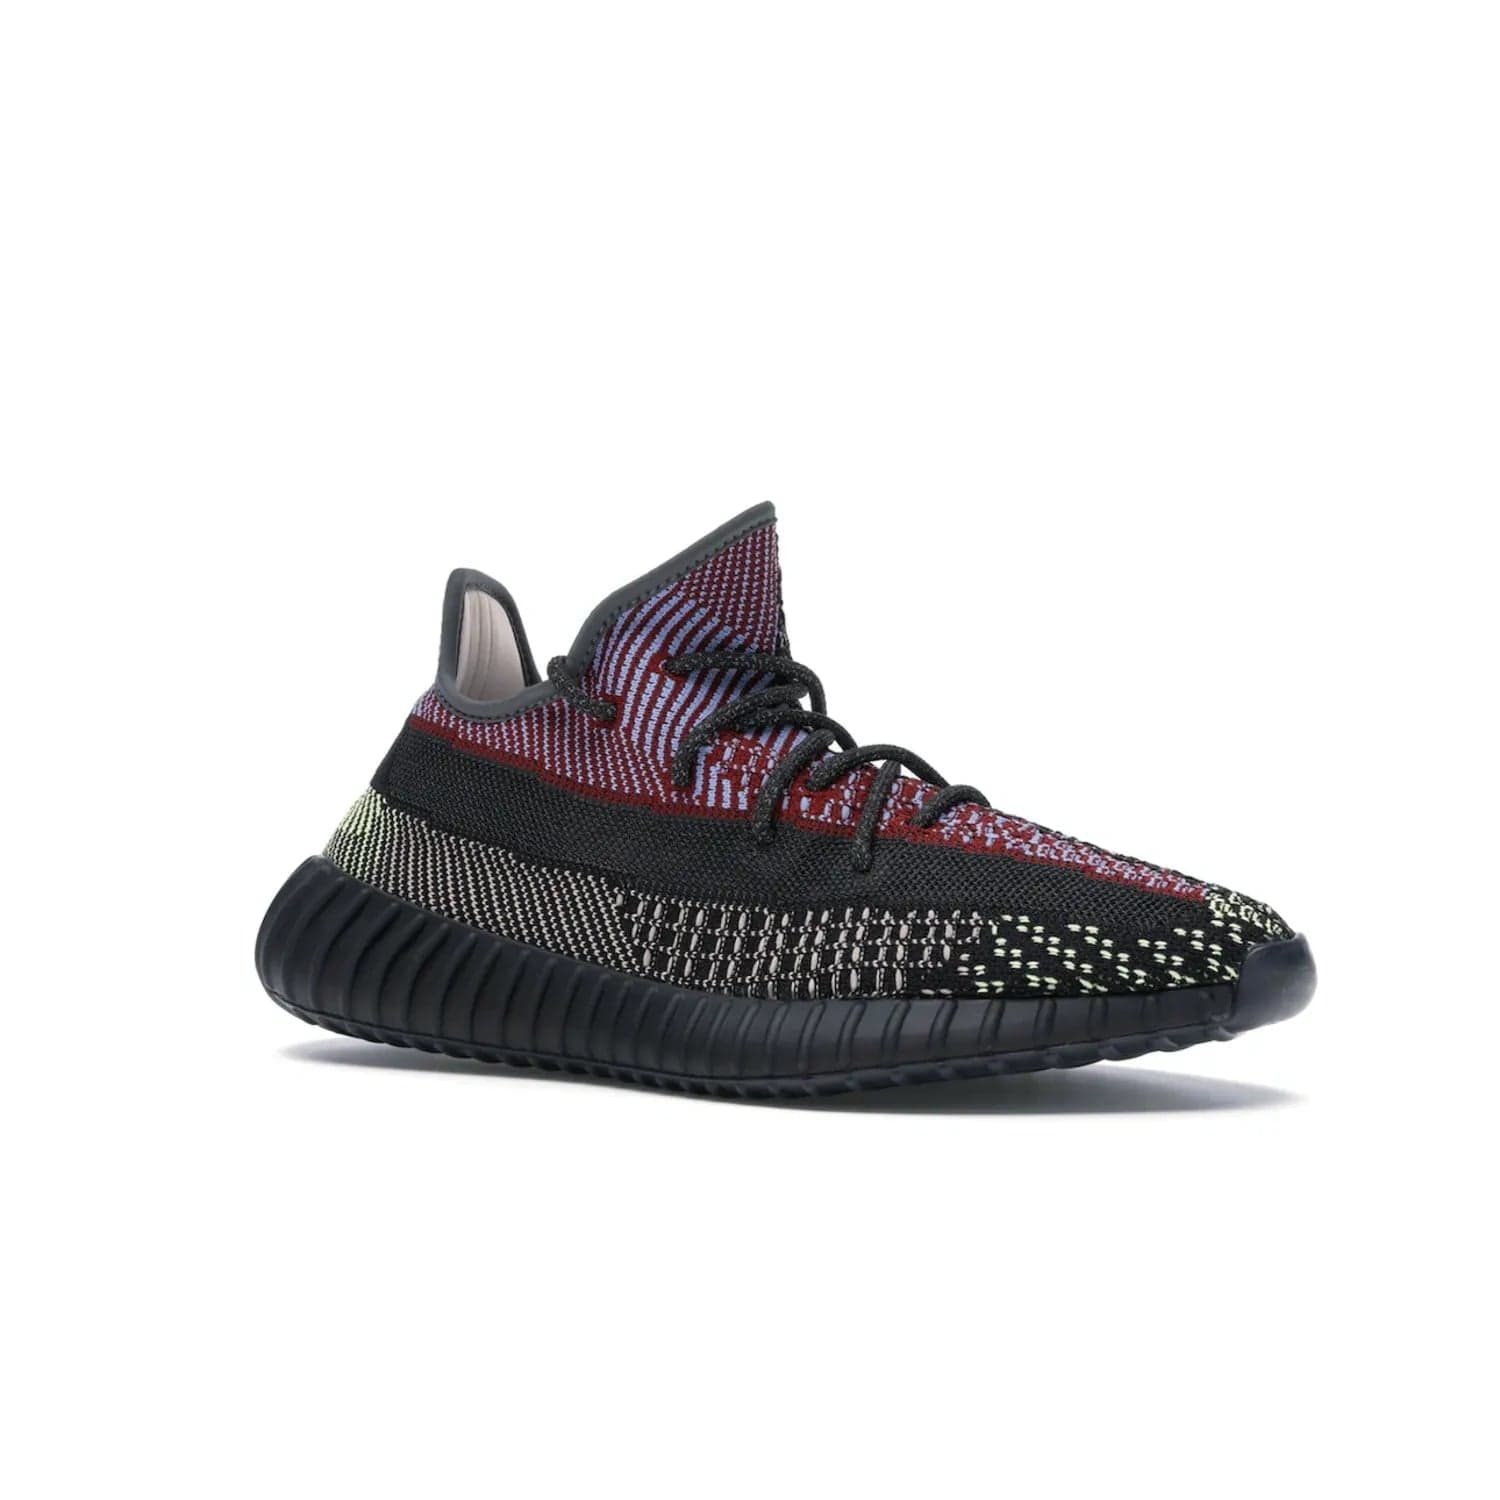 adidas Yeezy Boost 350 V2 Yecheil (Non-Reflective) - Image 4 - Only at www.BallersClubKickz.com - Make a statement with the eye-catching adidas Yeezy Boost 350 V2 Yecheil Non-Reflective. Featuring a spectrum of colorful hues, black upper, Boost cushioning, and black side stripe, the sneaker brings a luxe yet playful finish to any outfit.